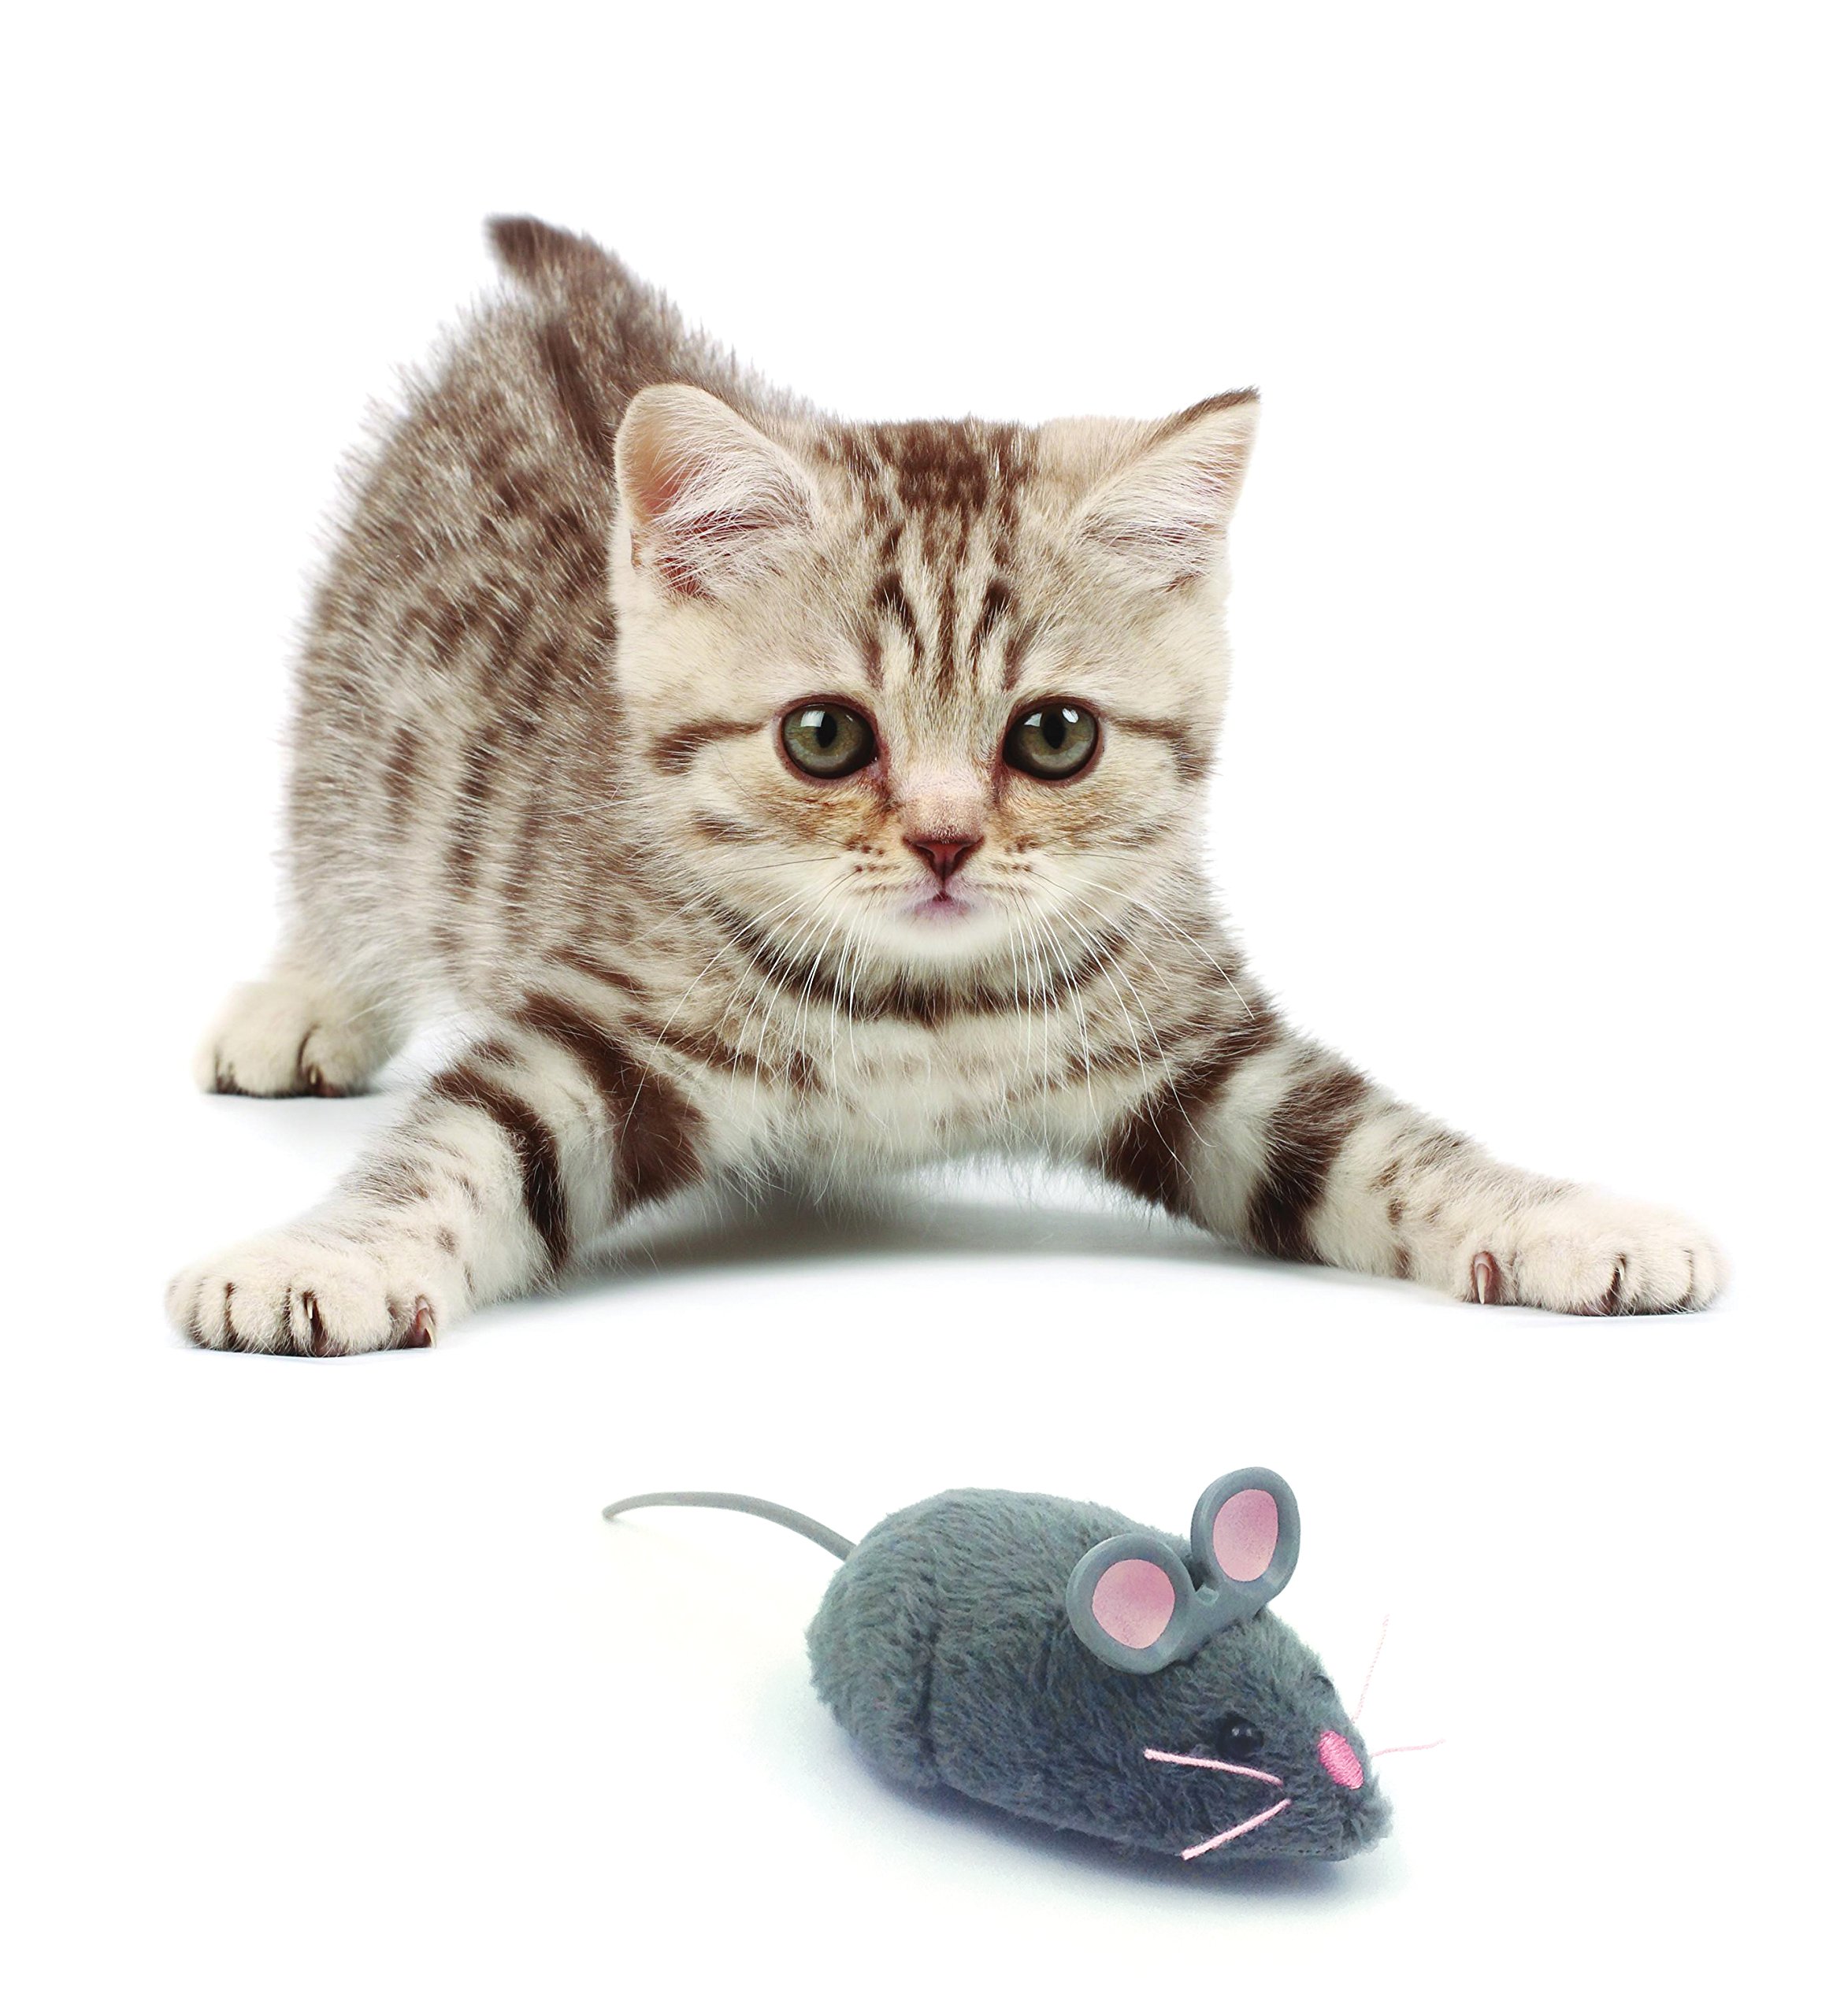 HEXBUG Mouse Robotic Cat Toy (GREY) for all breed sizes